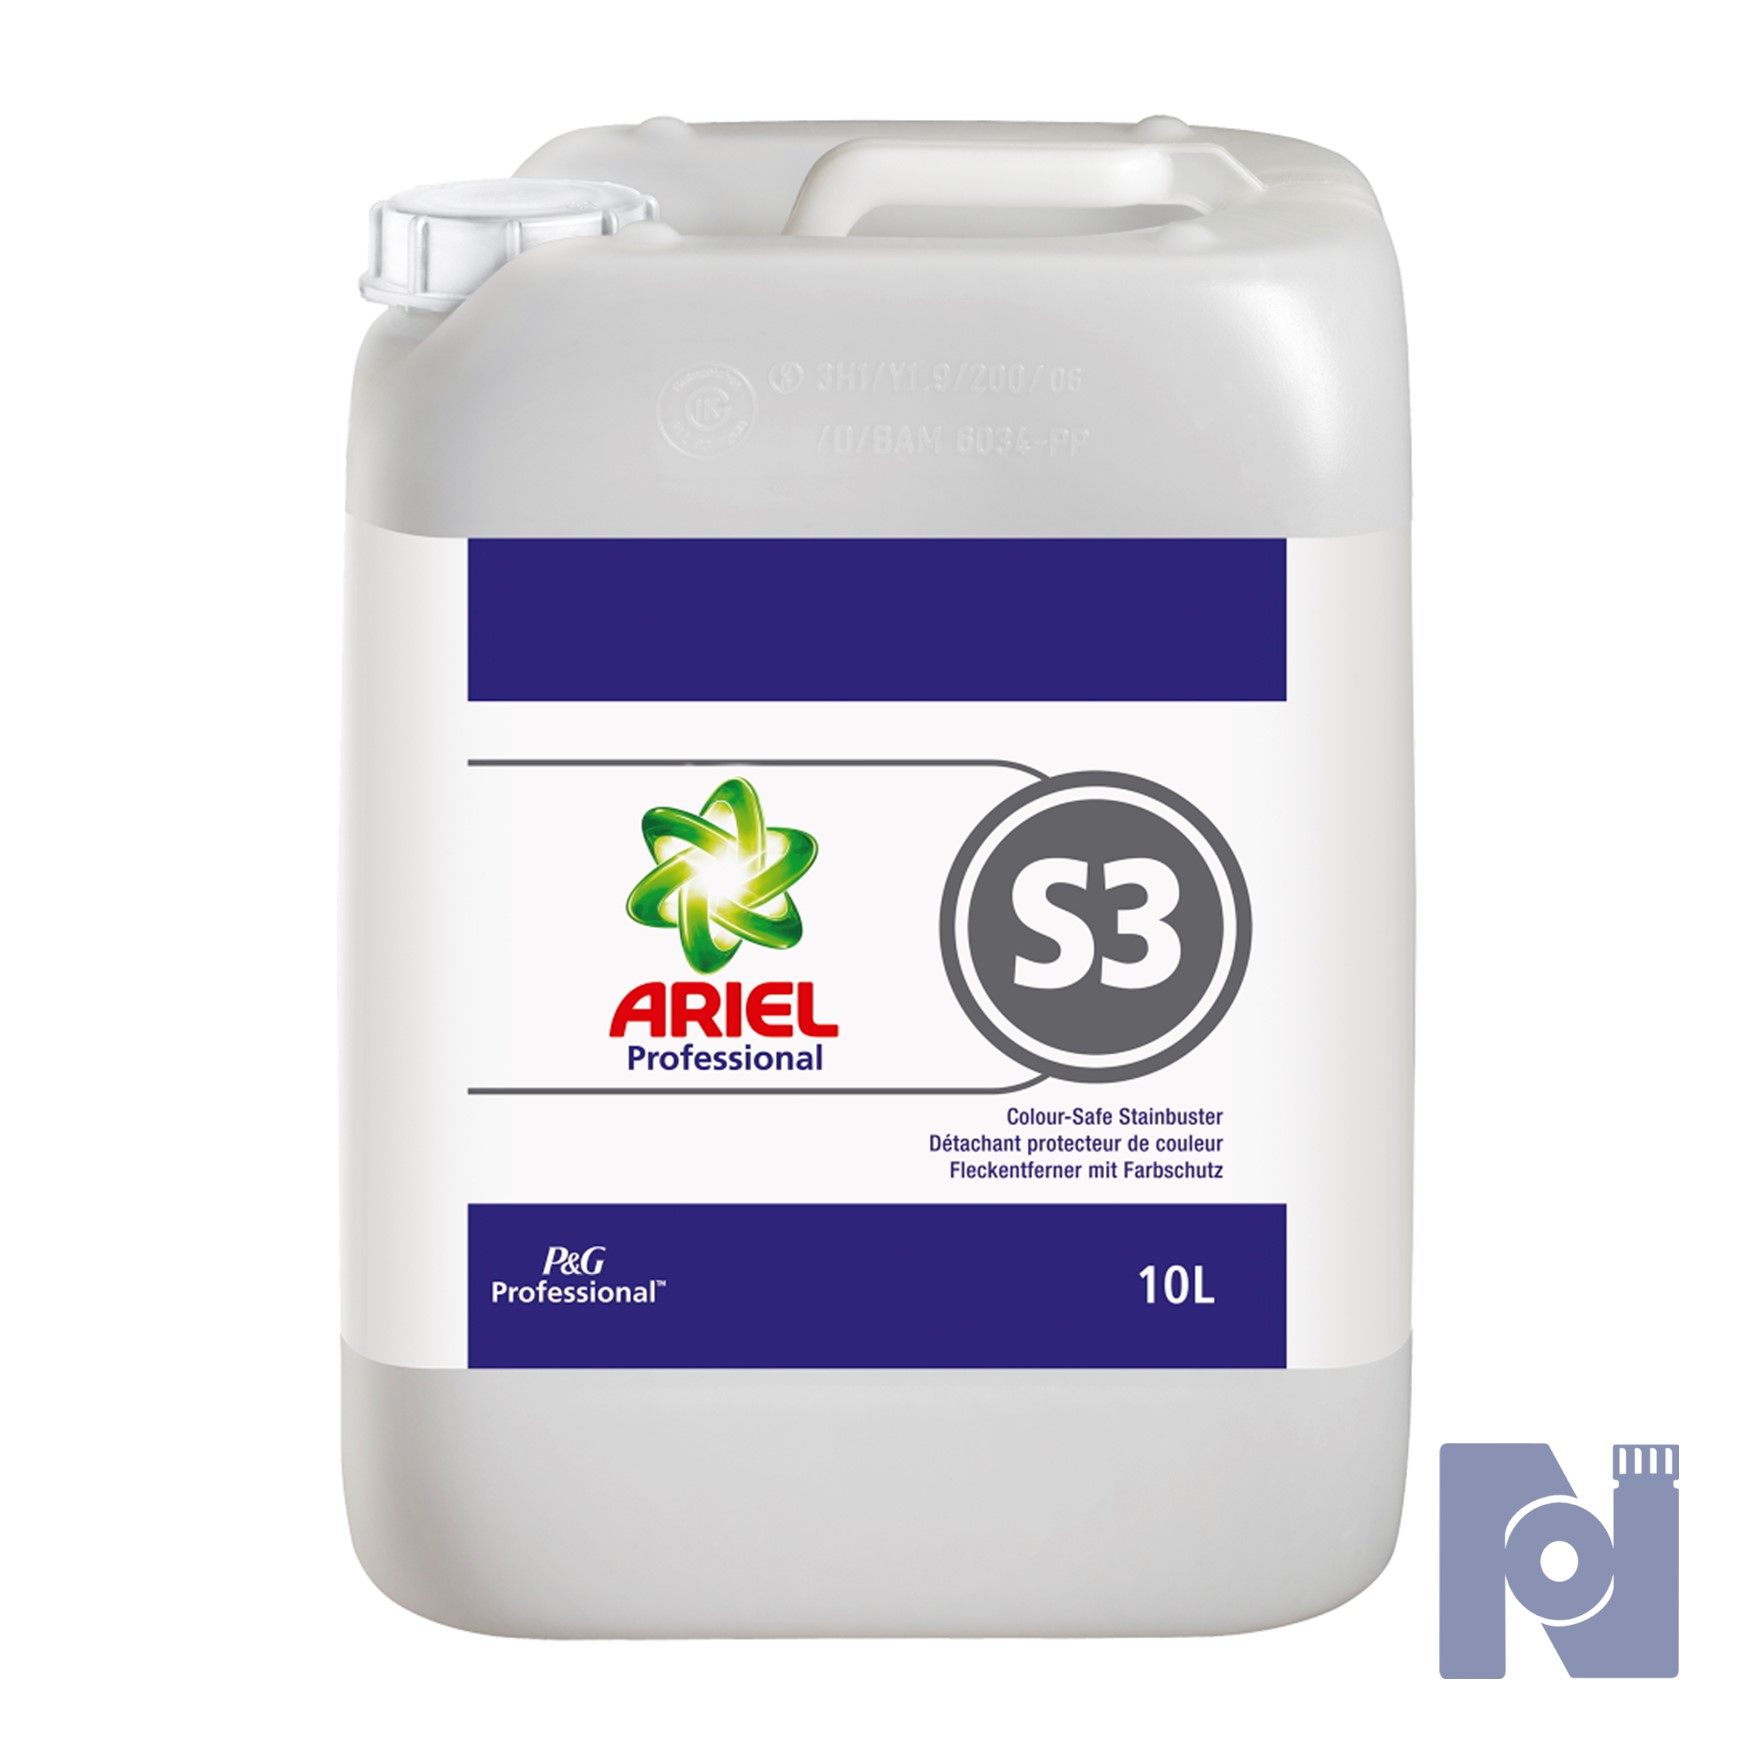 Ariel Stainbuster Professional Autodose S3